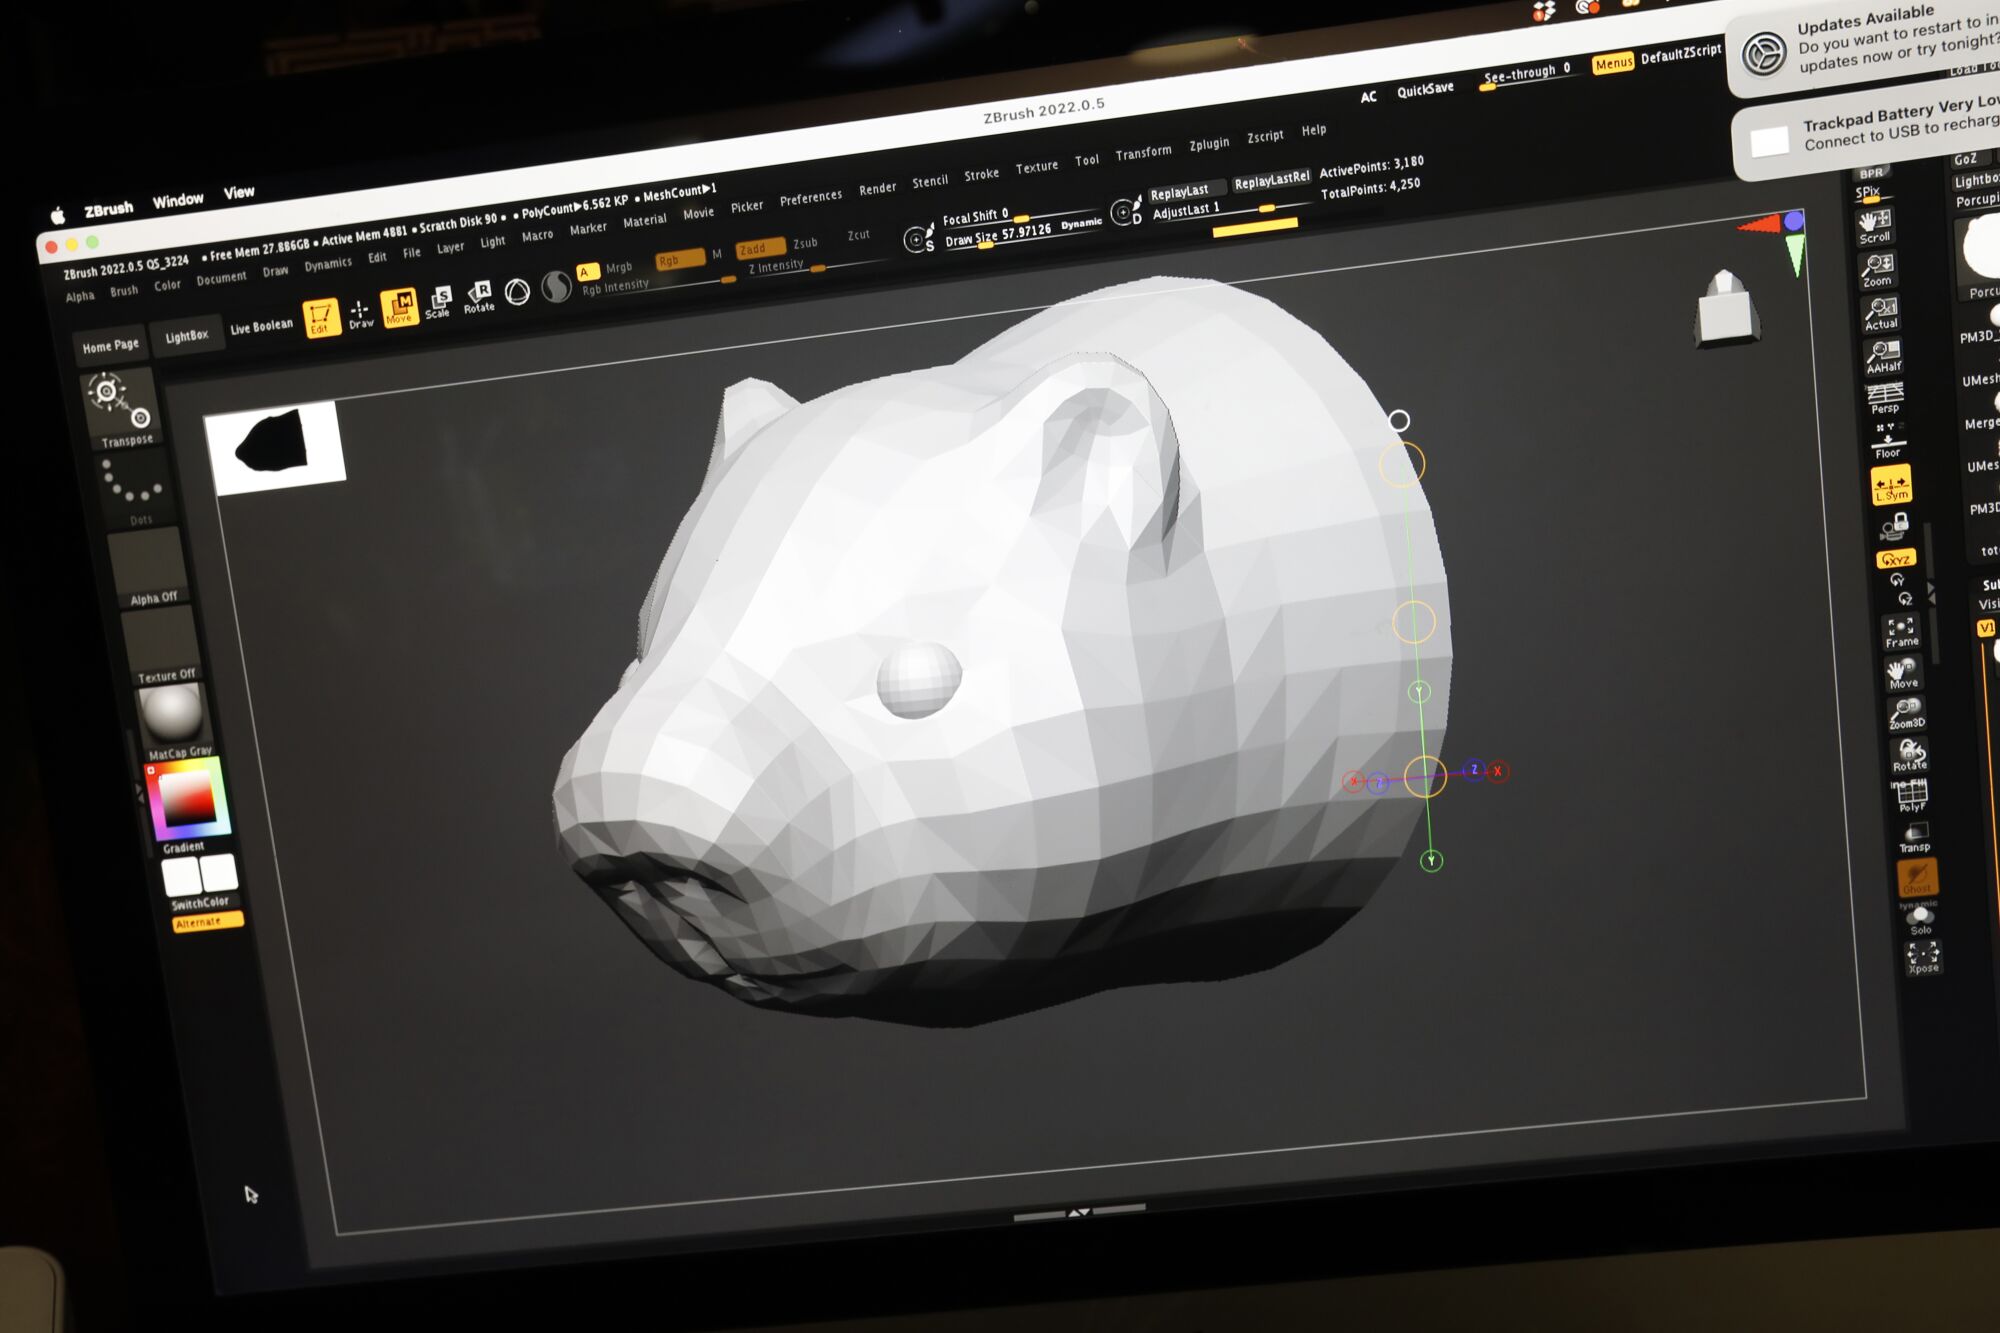 An image of a computer model of a porcupine